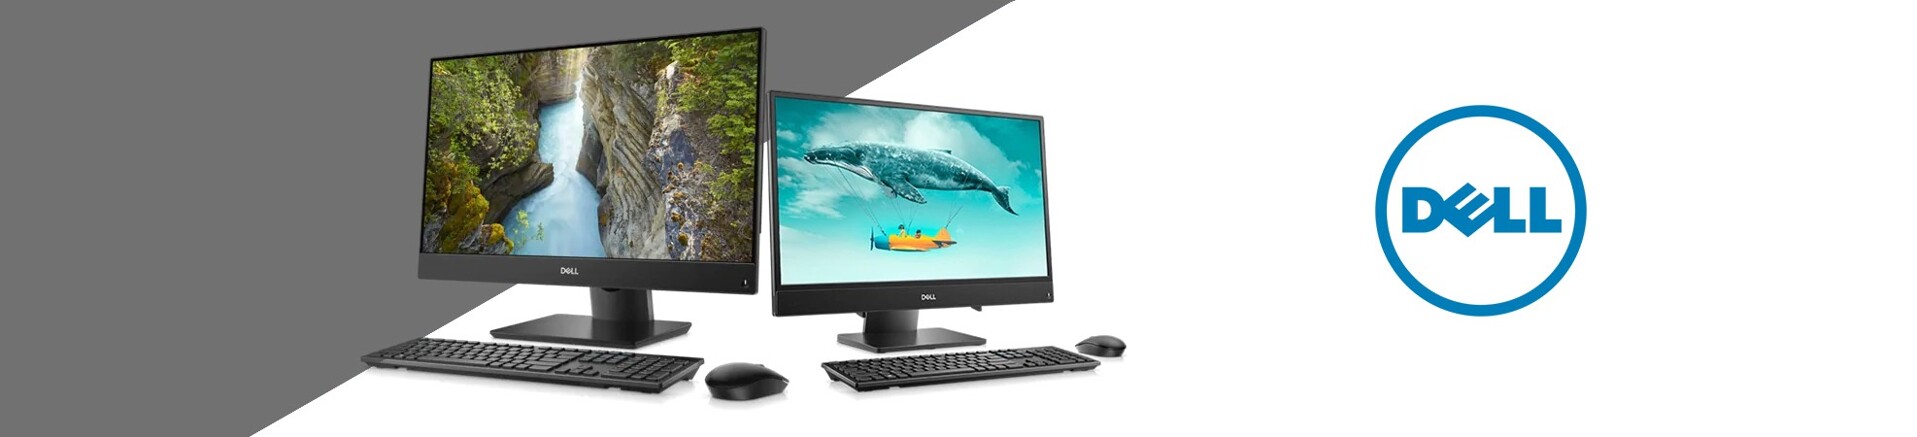 dell monitor itzoo banner 